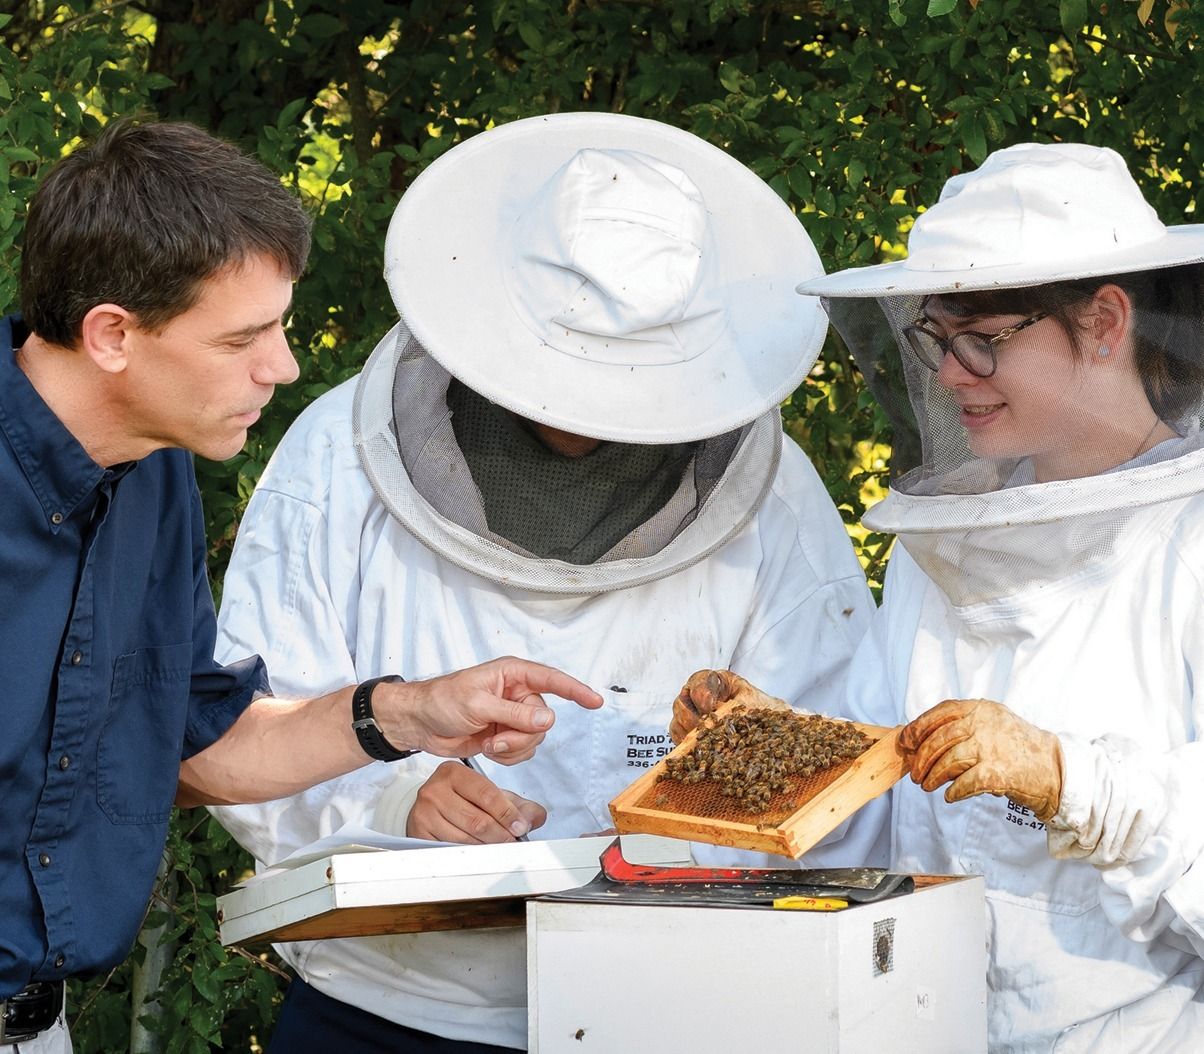 Rueppell and undergraduate researches assess a queen bee